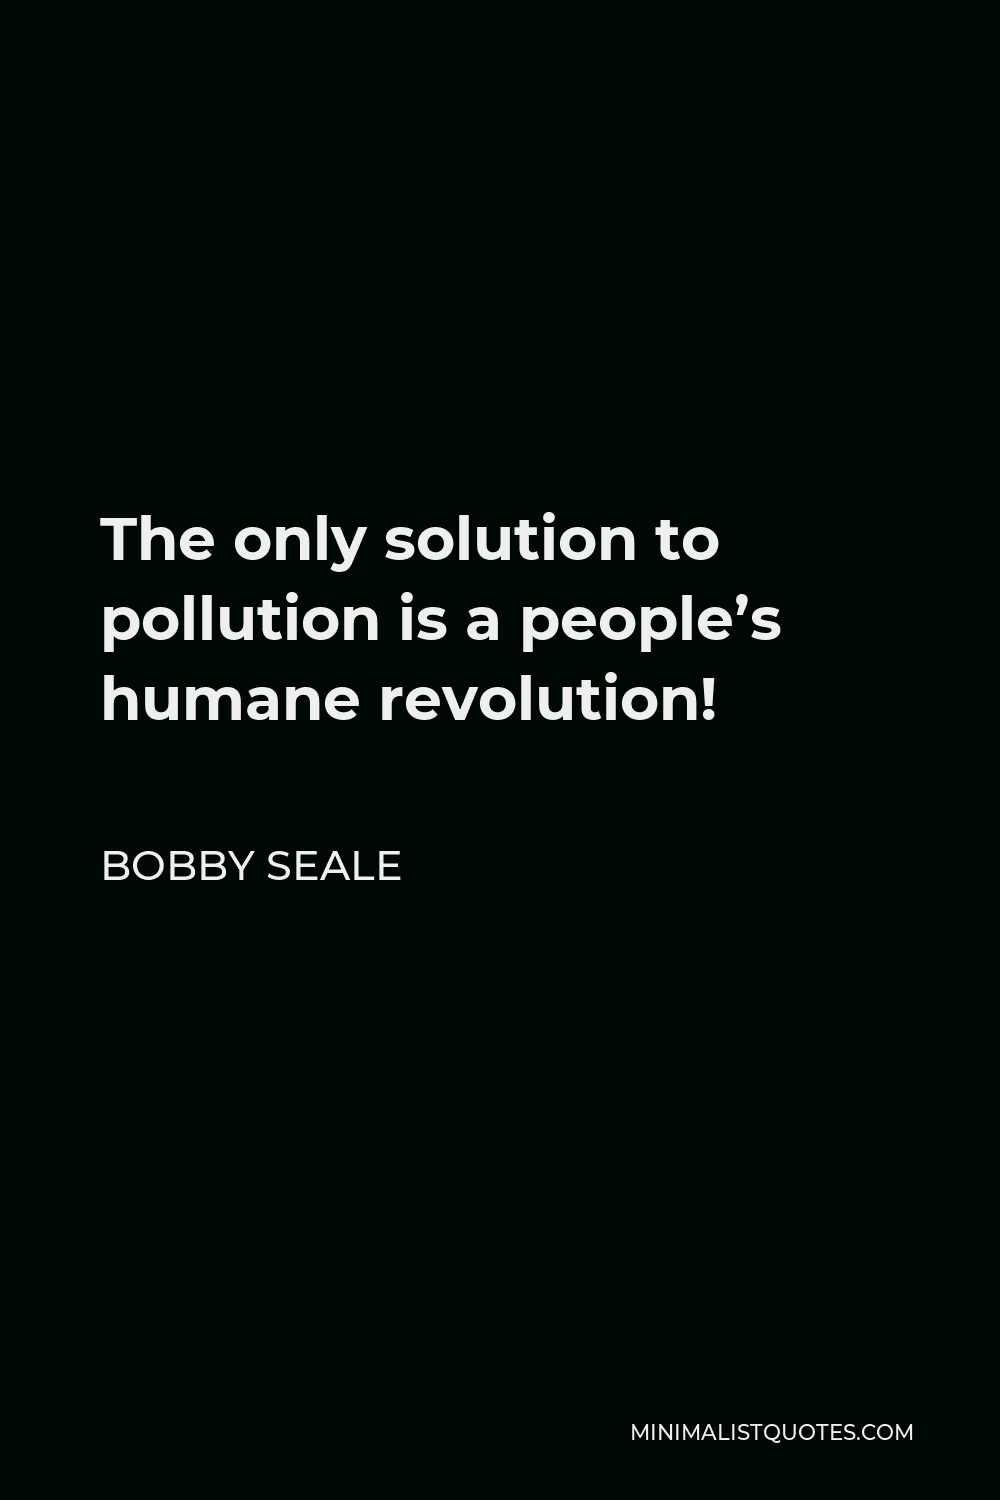 Bobby Seale Quote - The only solution to pollution is a people’s humane revolution!